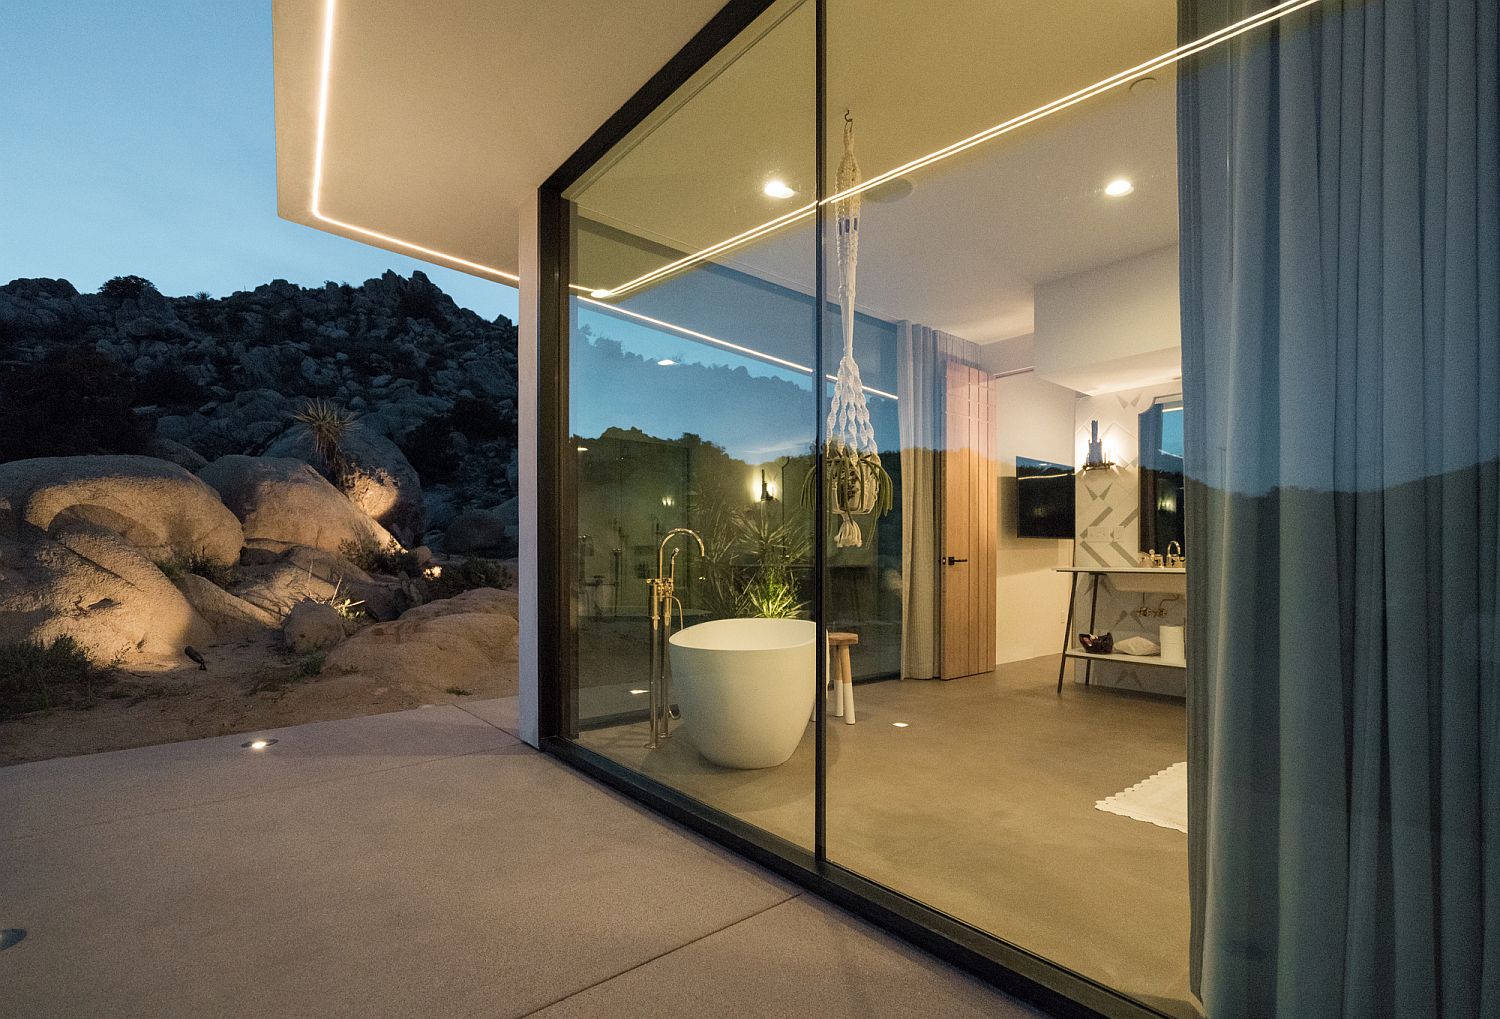 Floor-to-ceiling glass walls open up the interior to the view outside